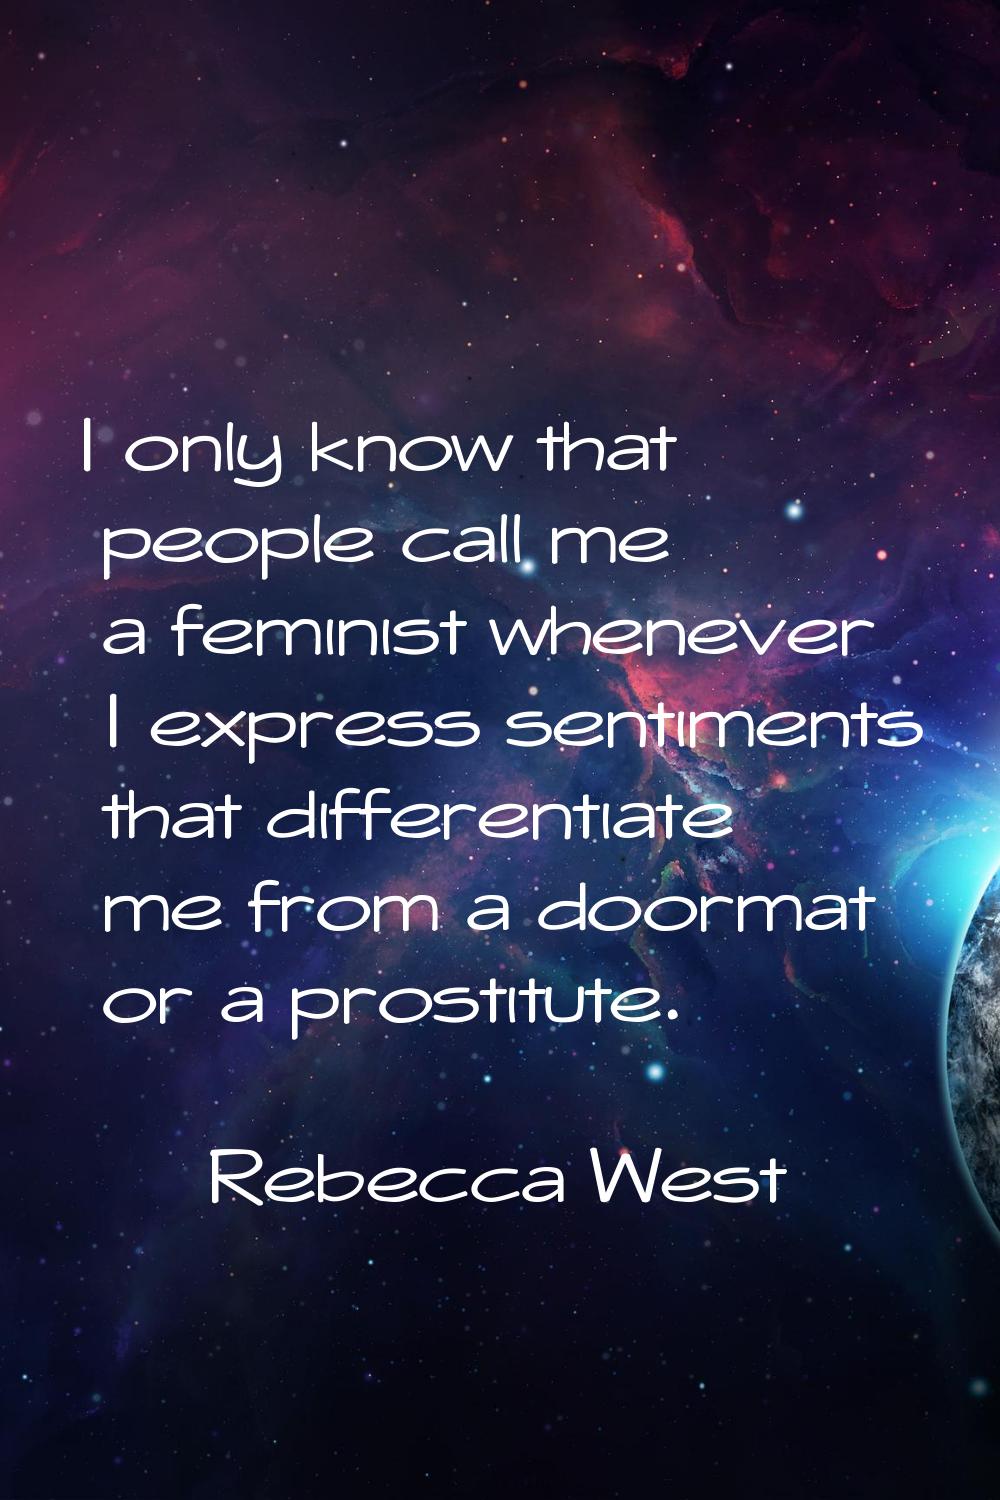 I only know that people call me a feminist whenever I express sentiments that differentiate me from